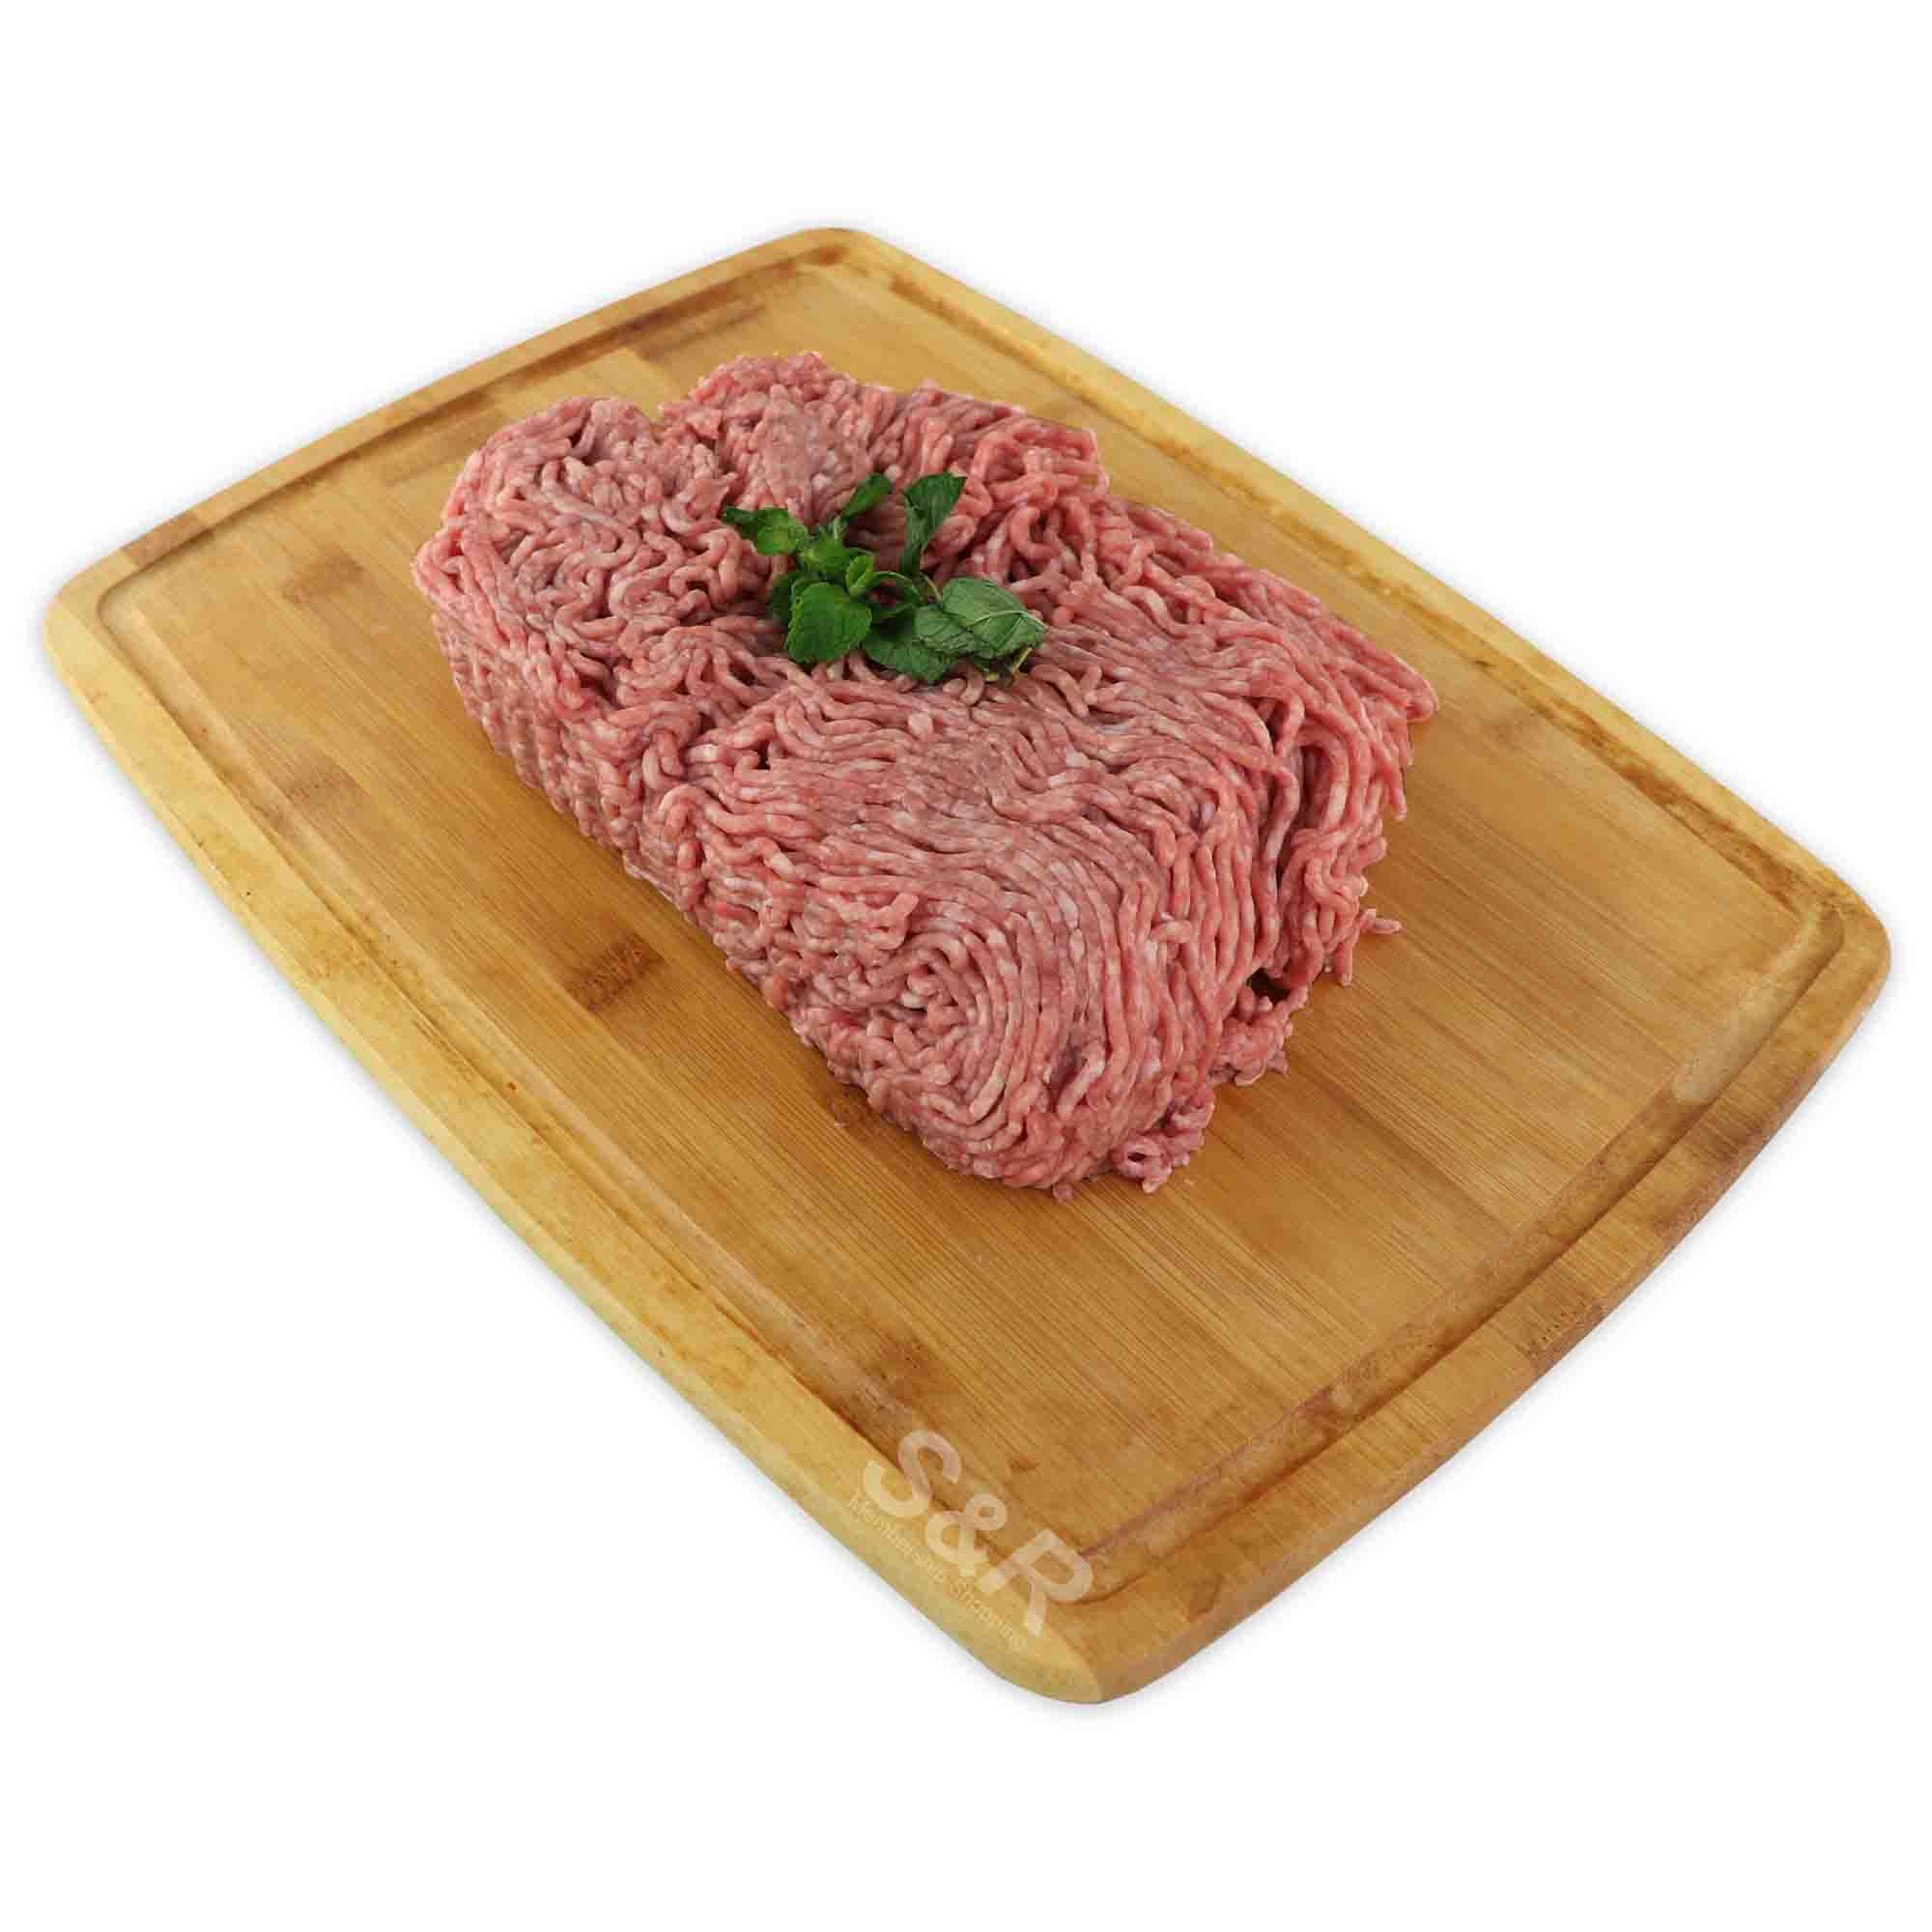 Member's Value Ground Beef approx. 5kg